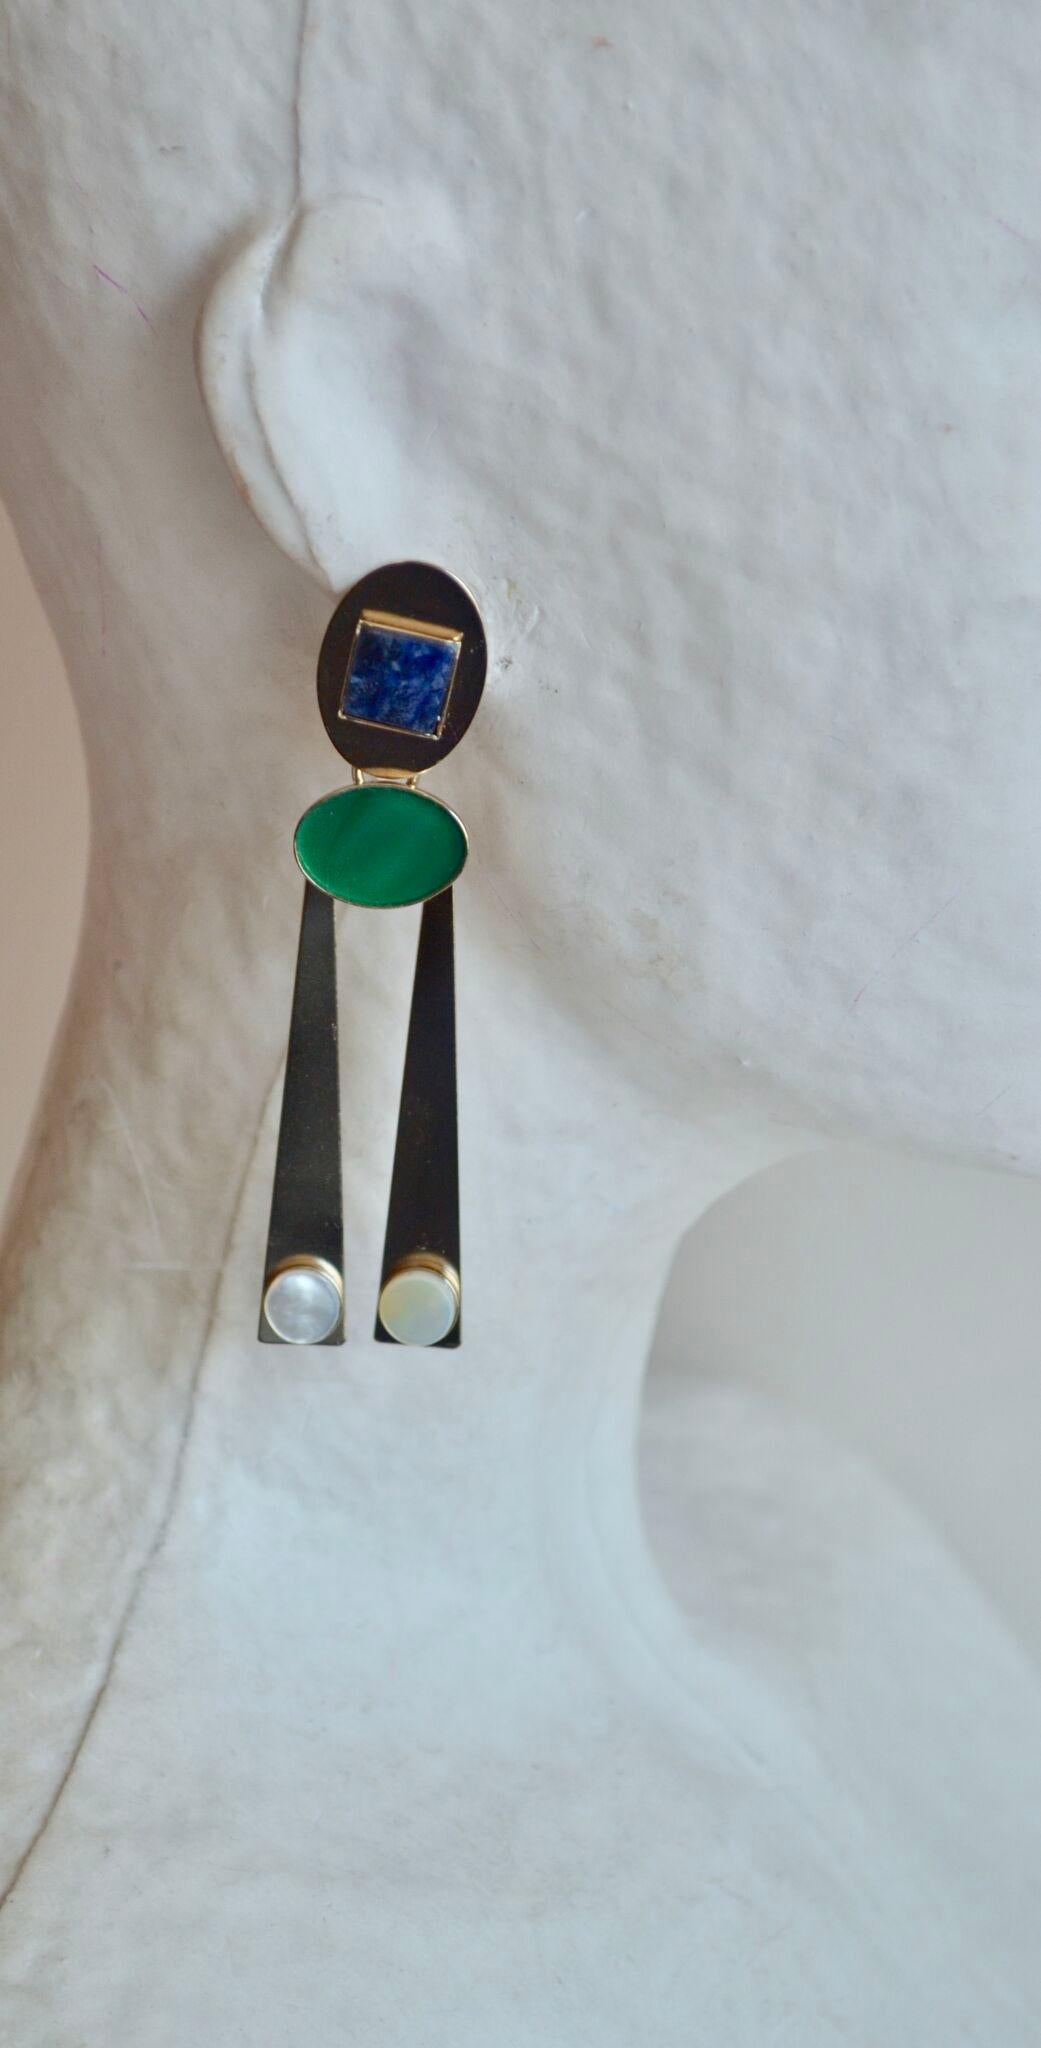 Palladium plated brass clip earrings with mother of pearl and jade cabochons from Philippe Ferrandis.